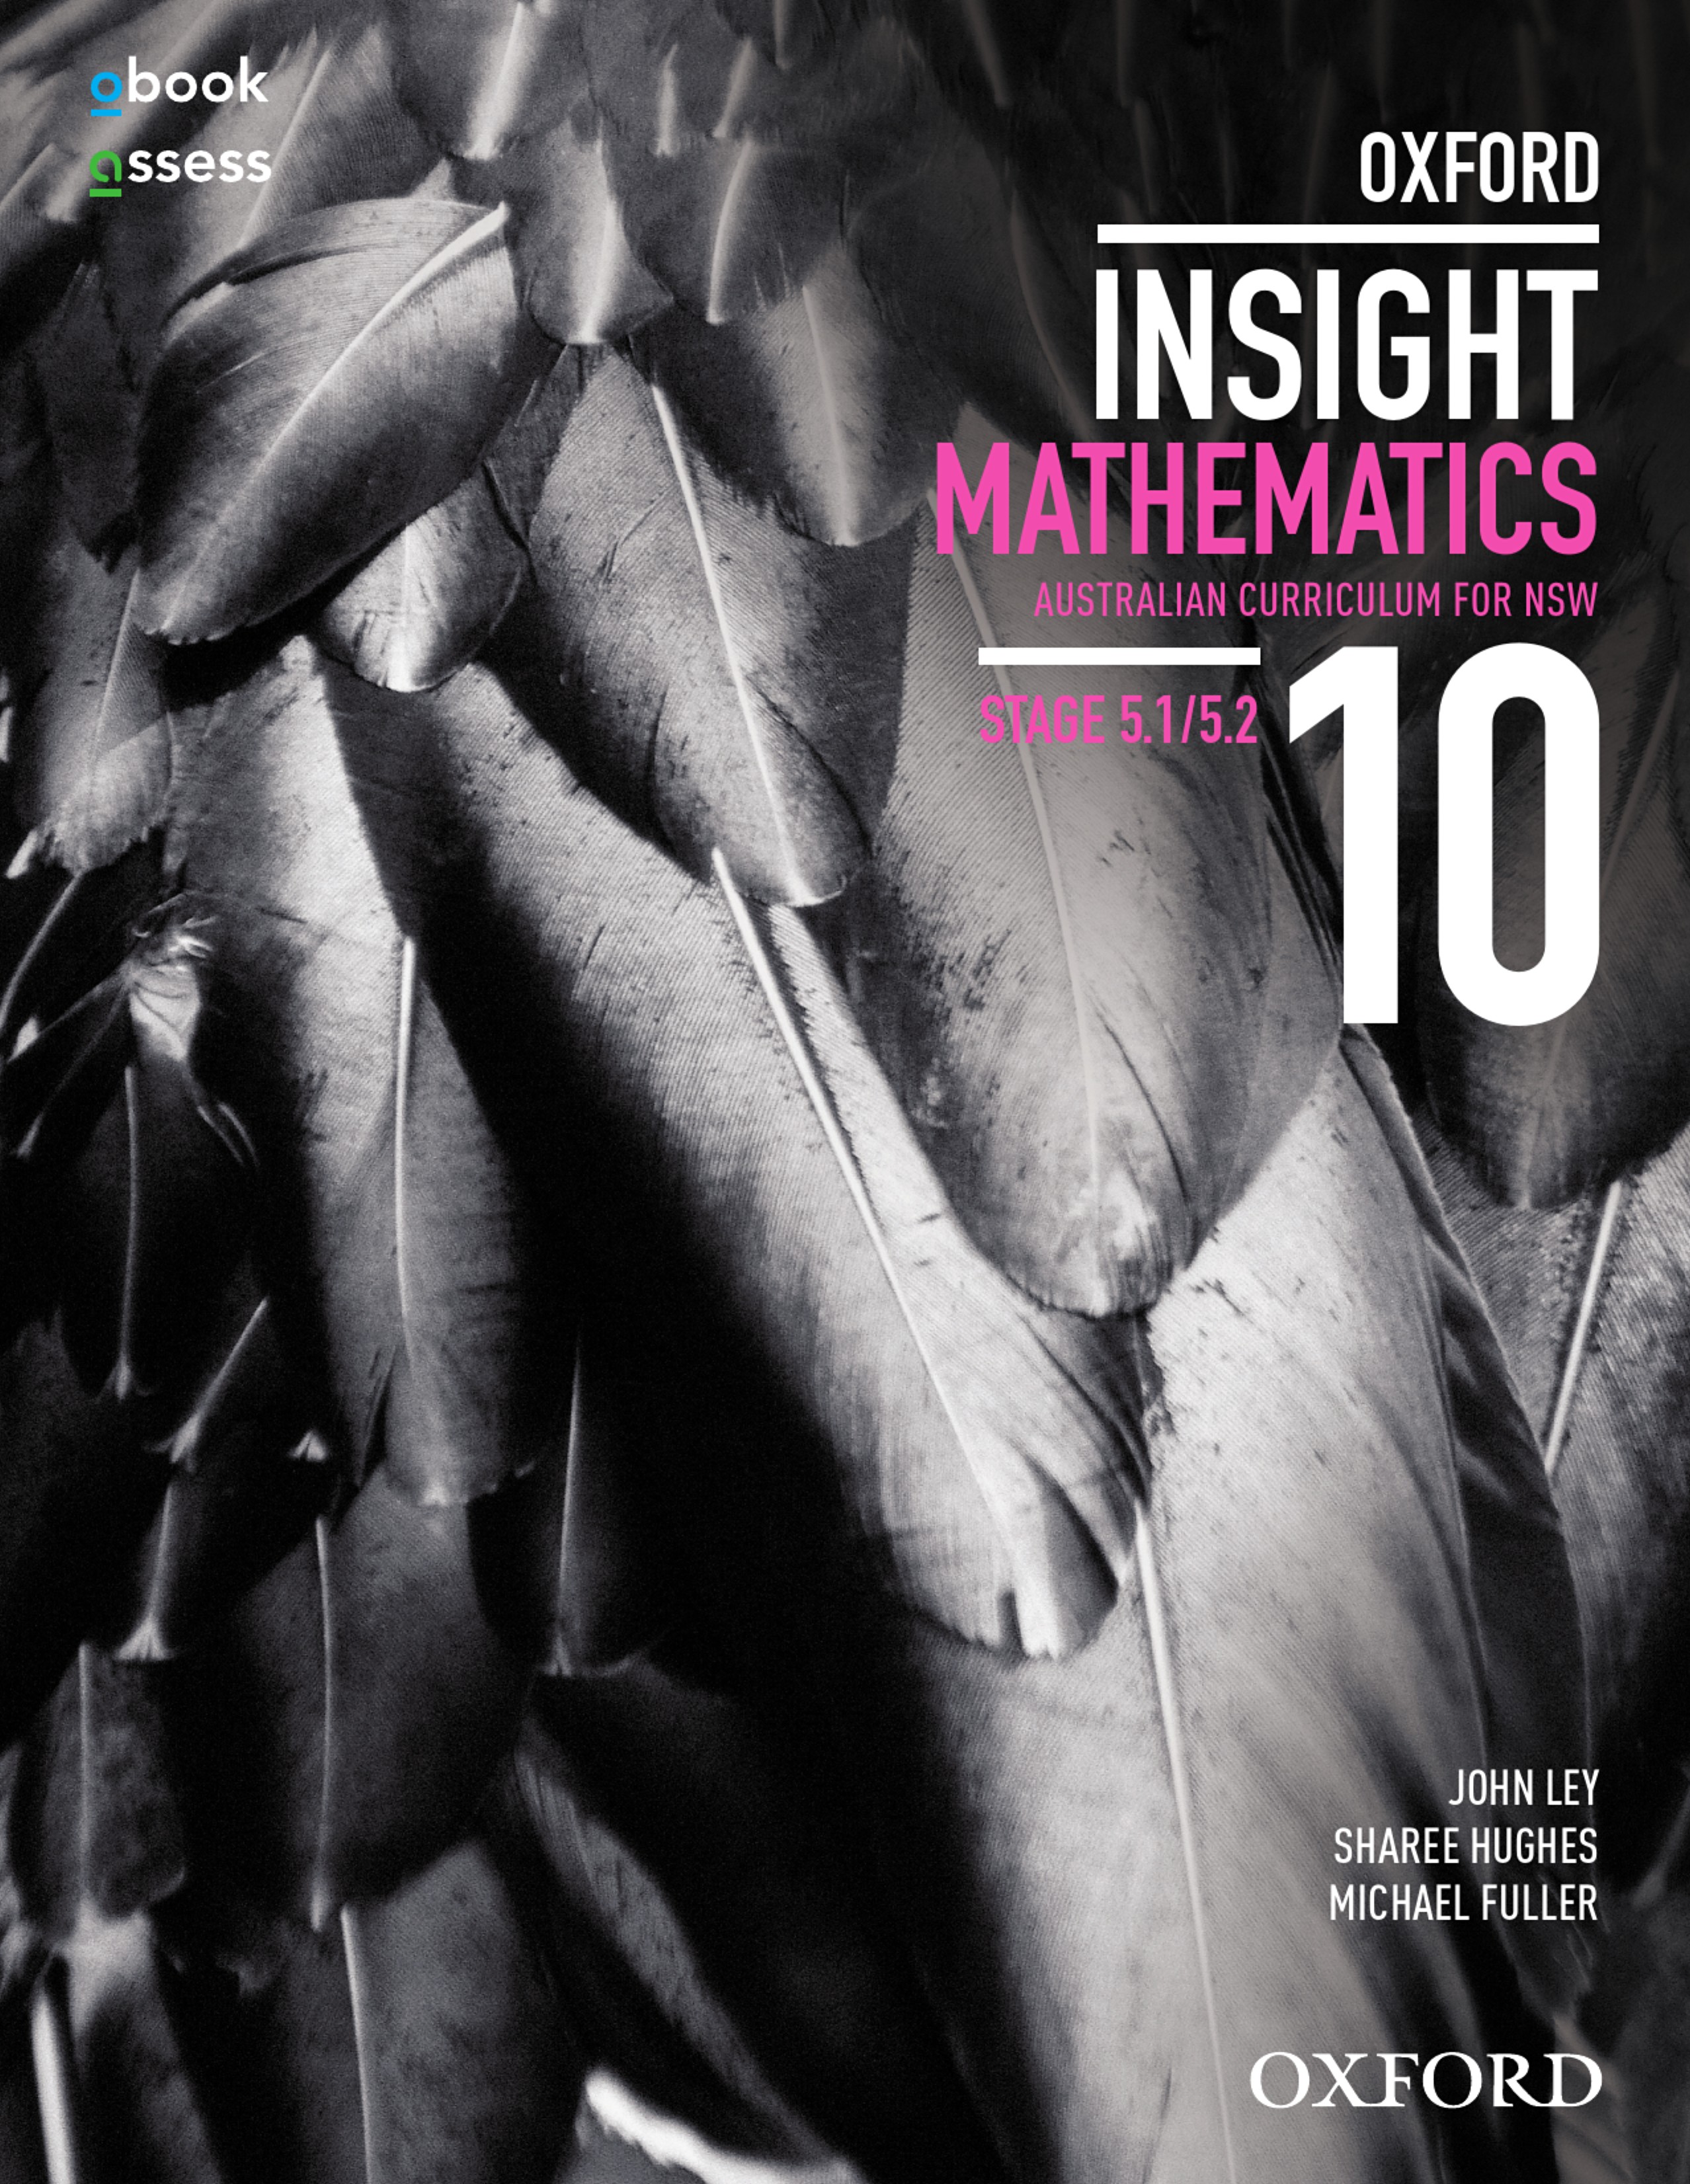 Oxford Insight Mathematics 10 Australian Curriculum for NSW Stages 5.1/5.2